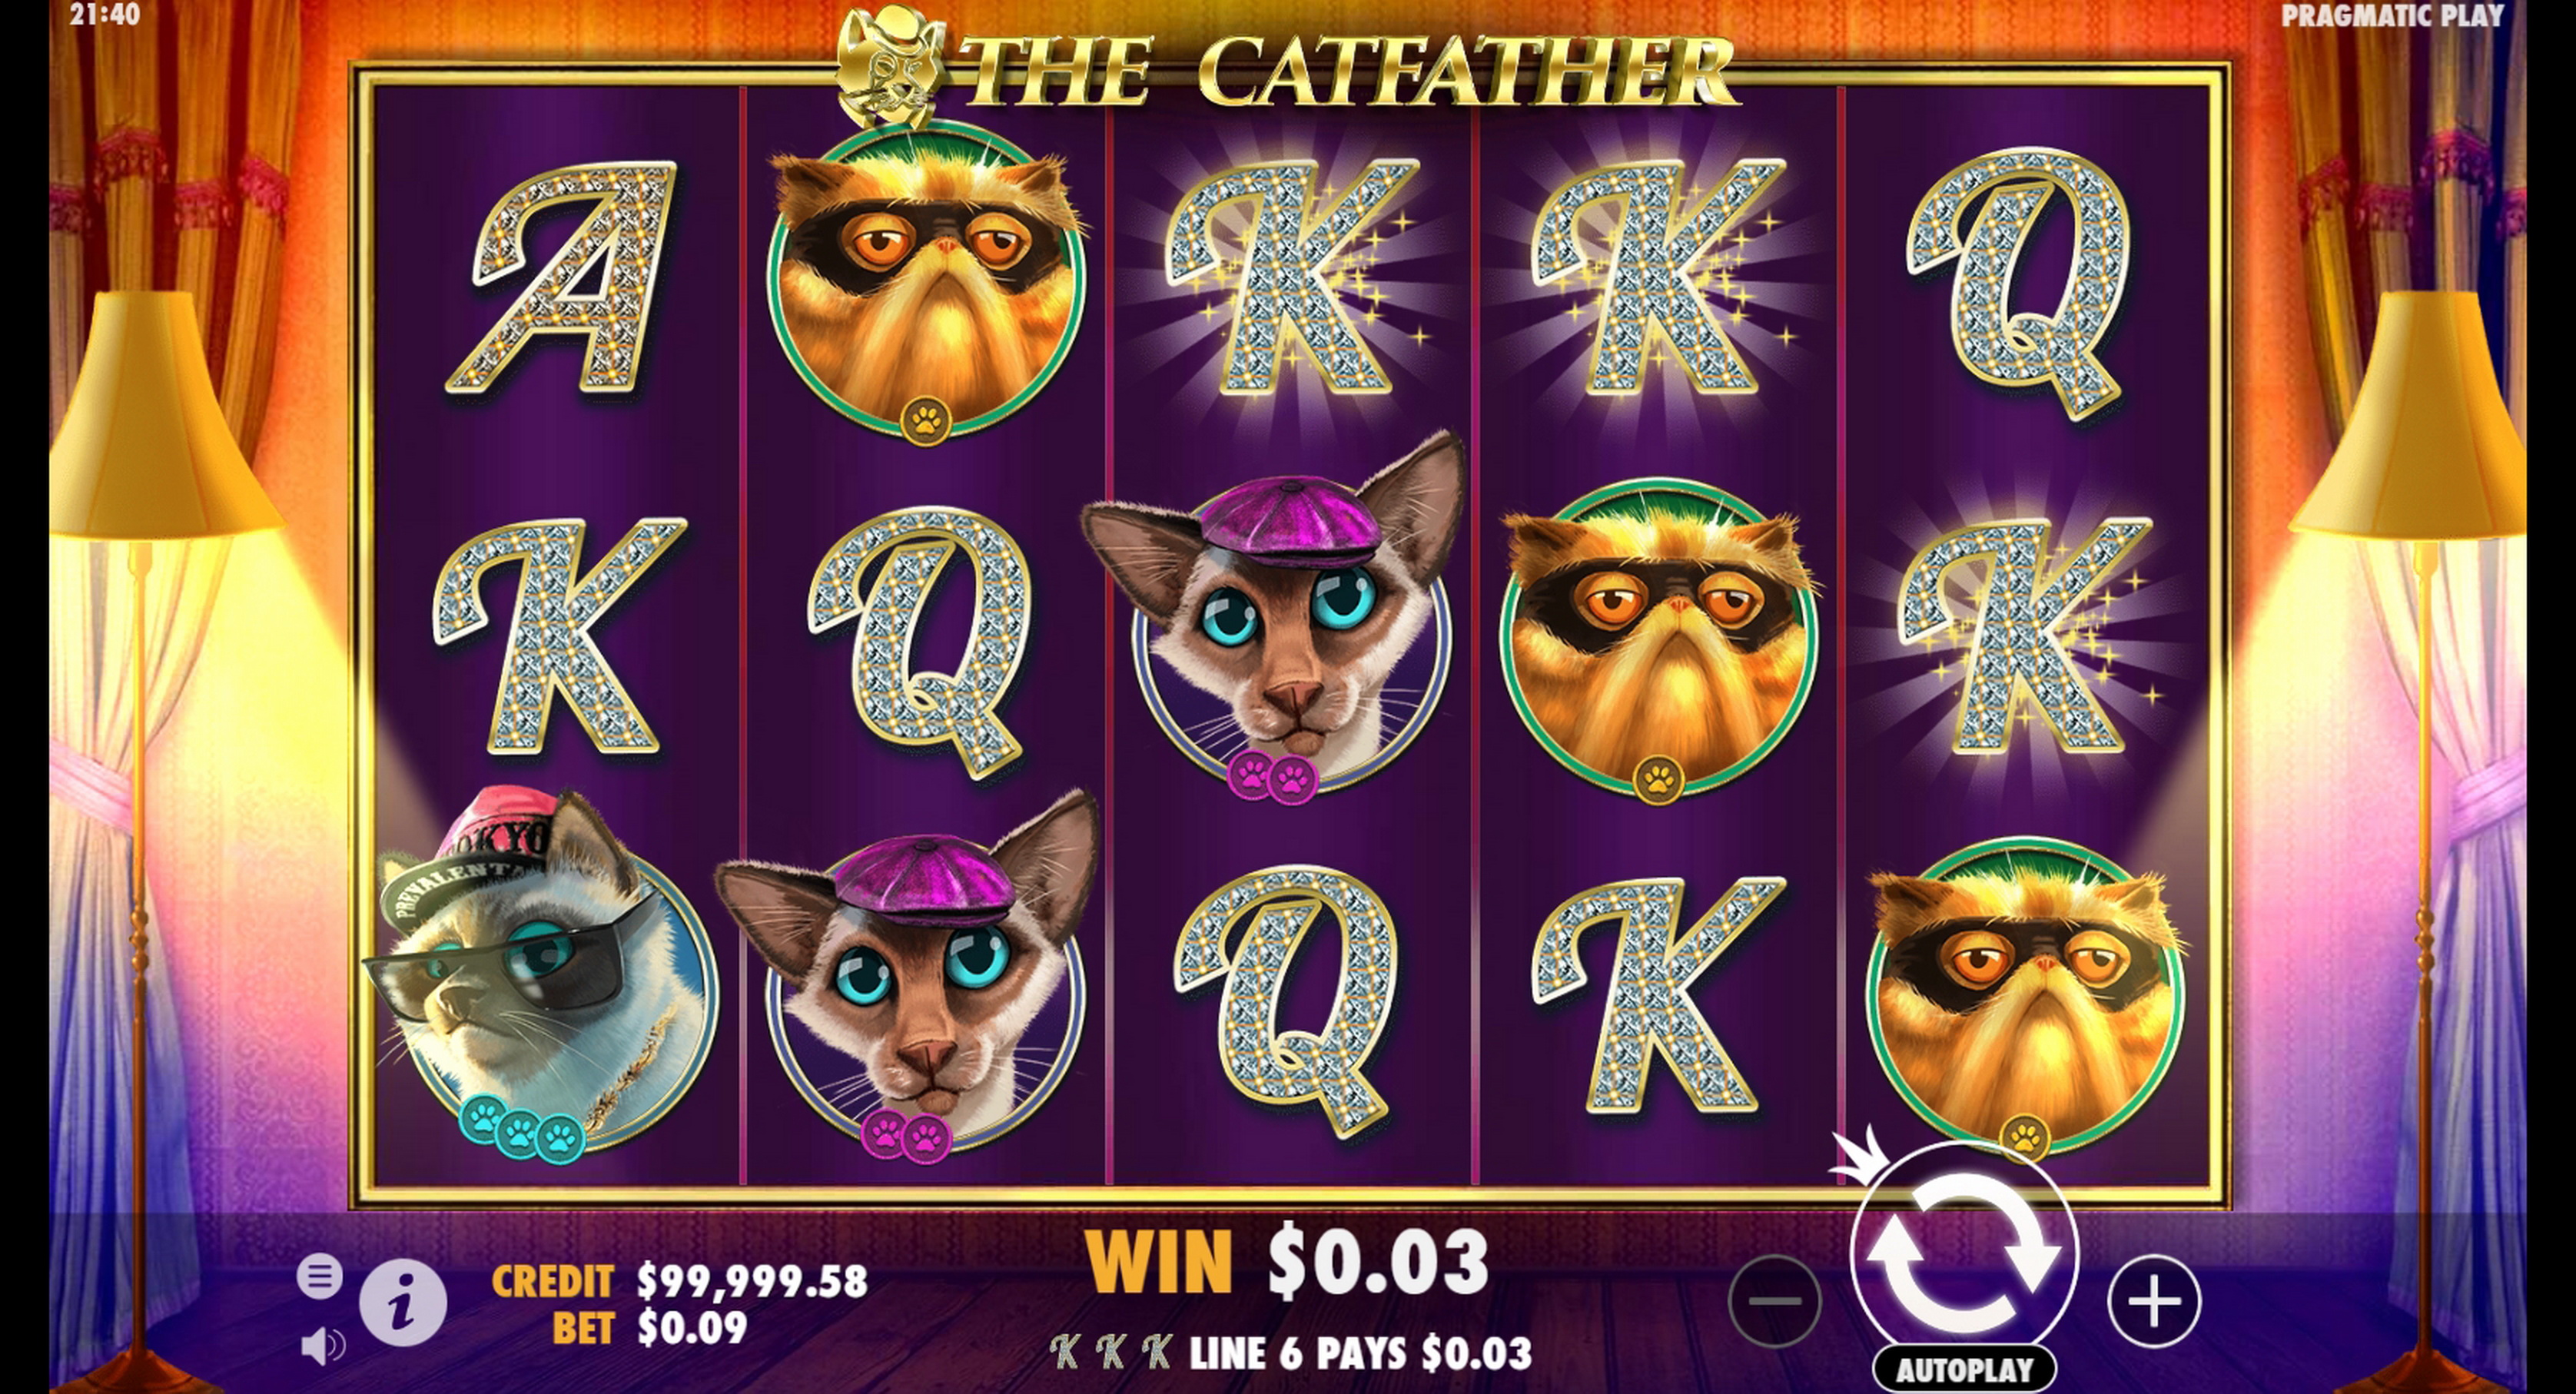 Win Money in The Catfather Free Slot Game by Pragmatic Play